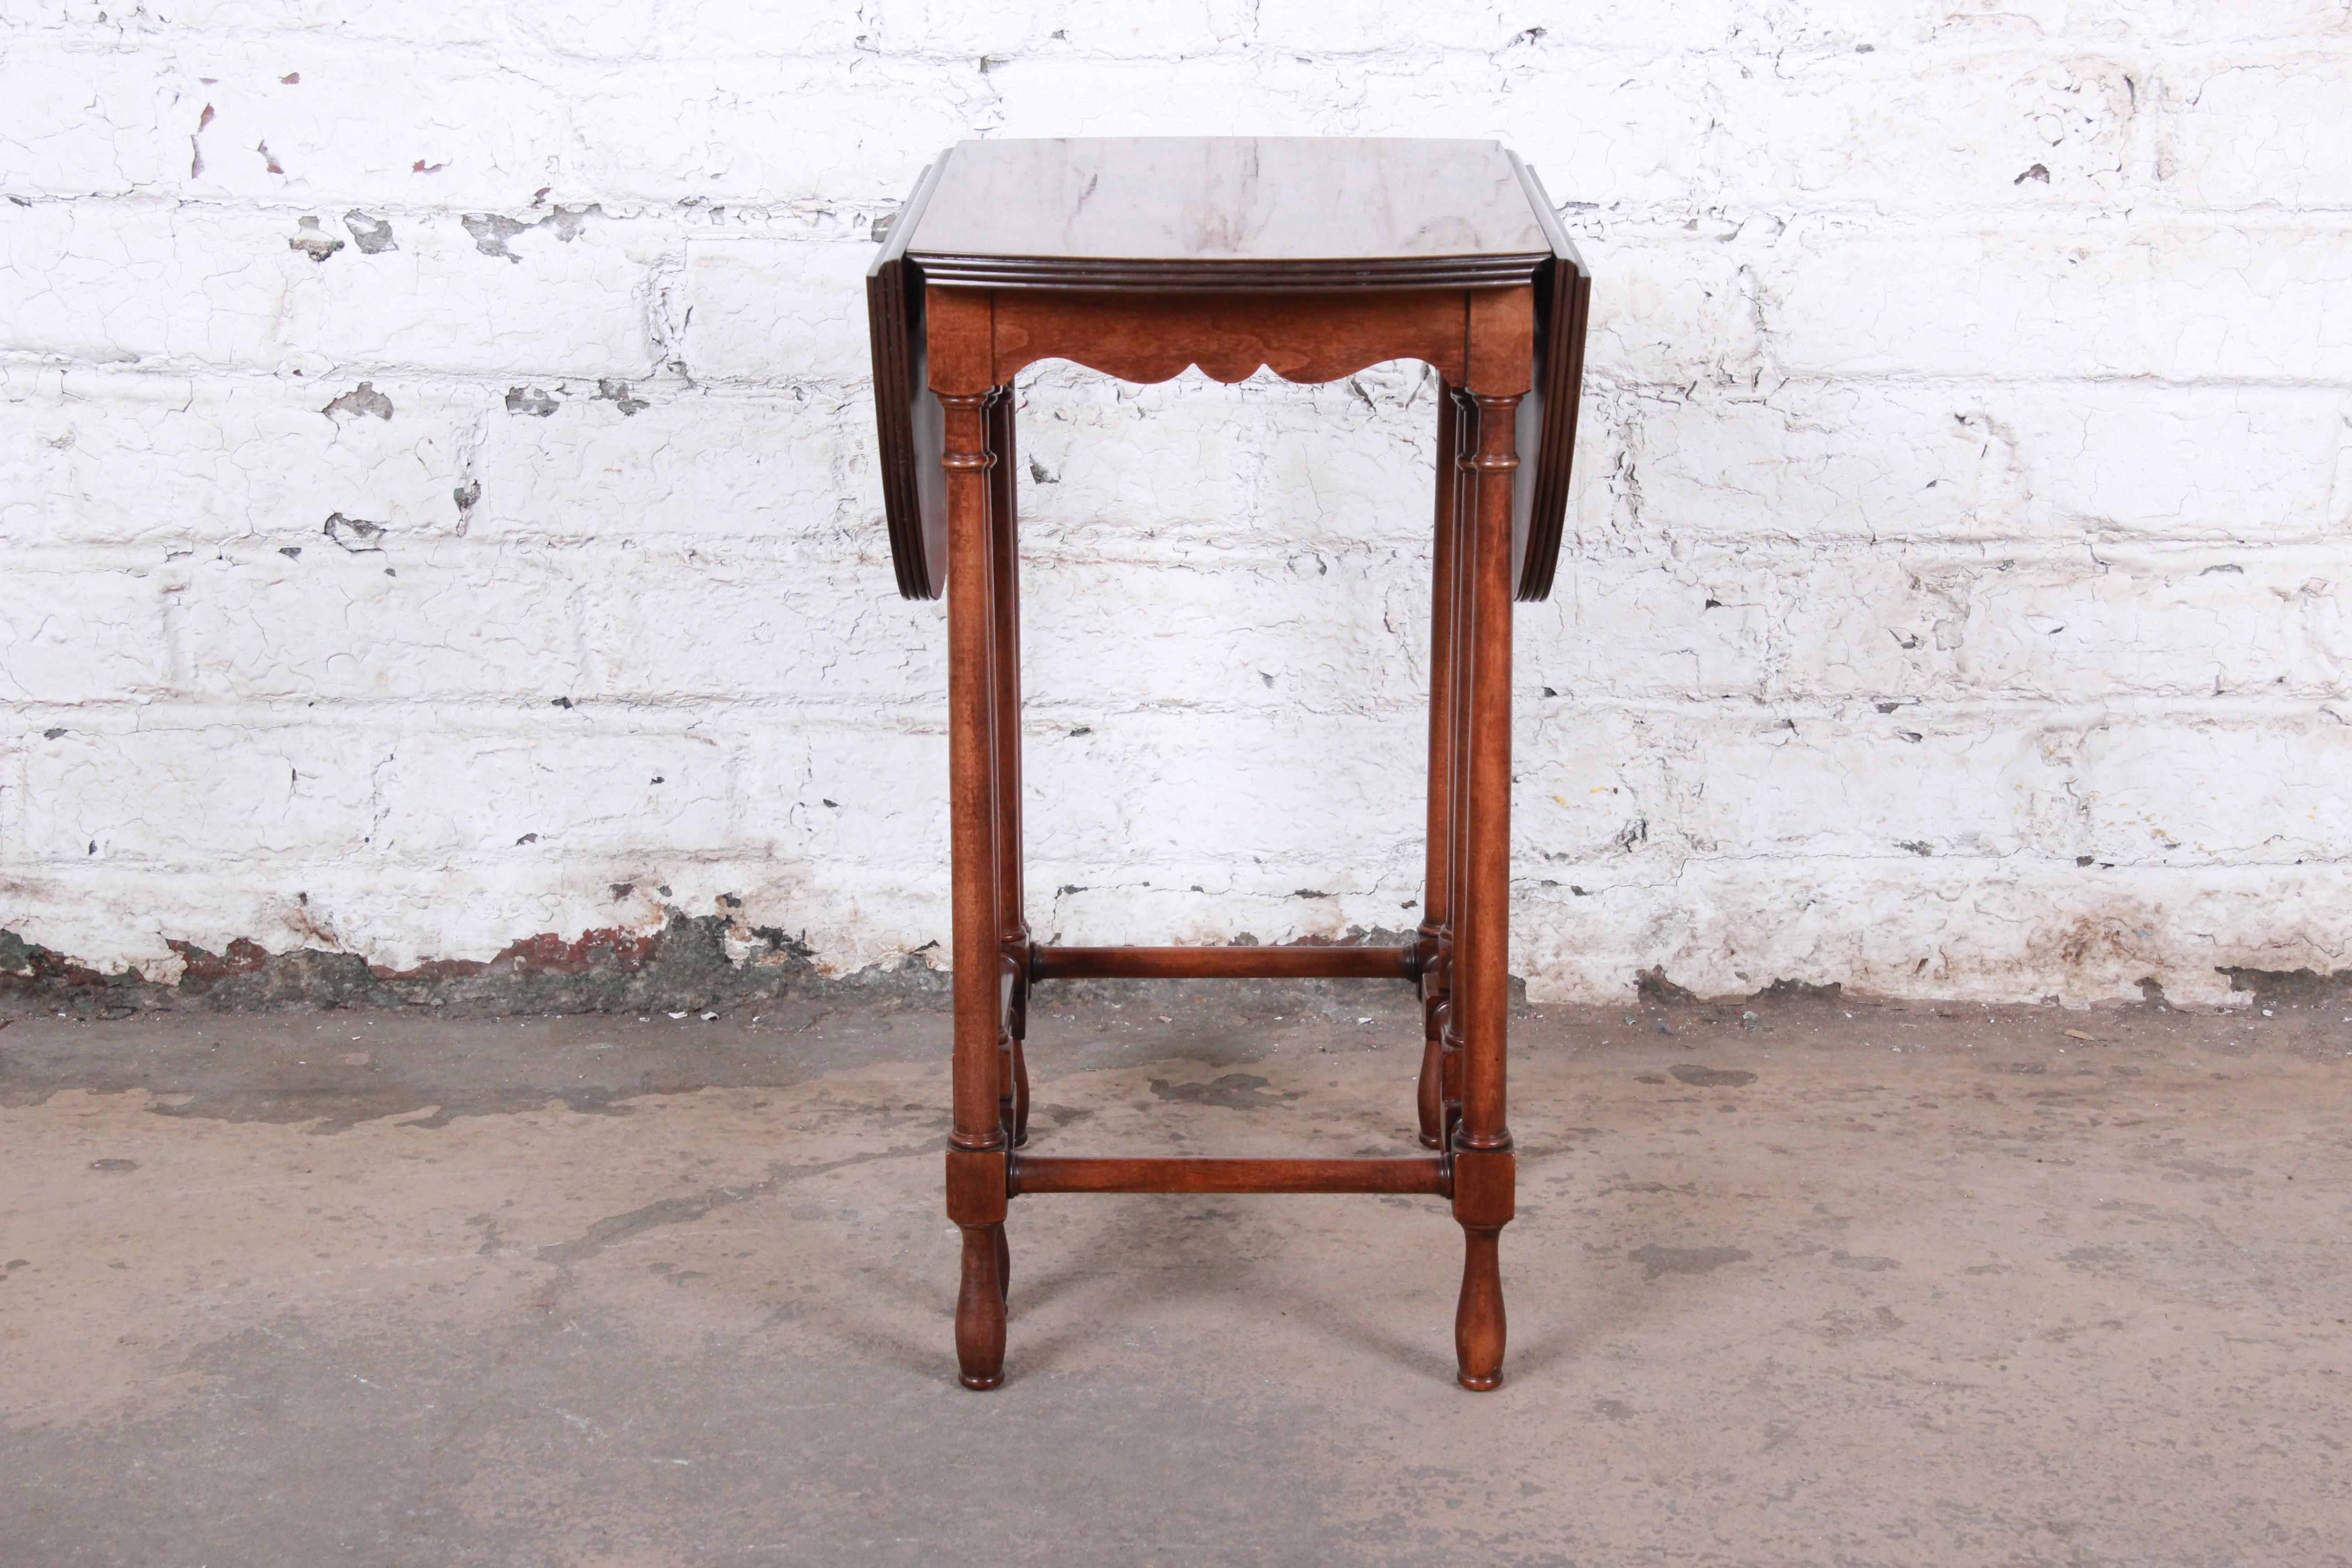 A beautiful gate leg drop leaf side table by Baker Furniture. The table features a gorgeous burled walnut top and solid walnut legs. The original Baker label is present on the underside. The table is in excellent original vintage